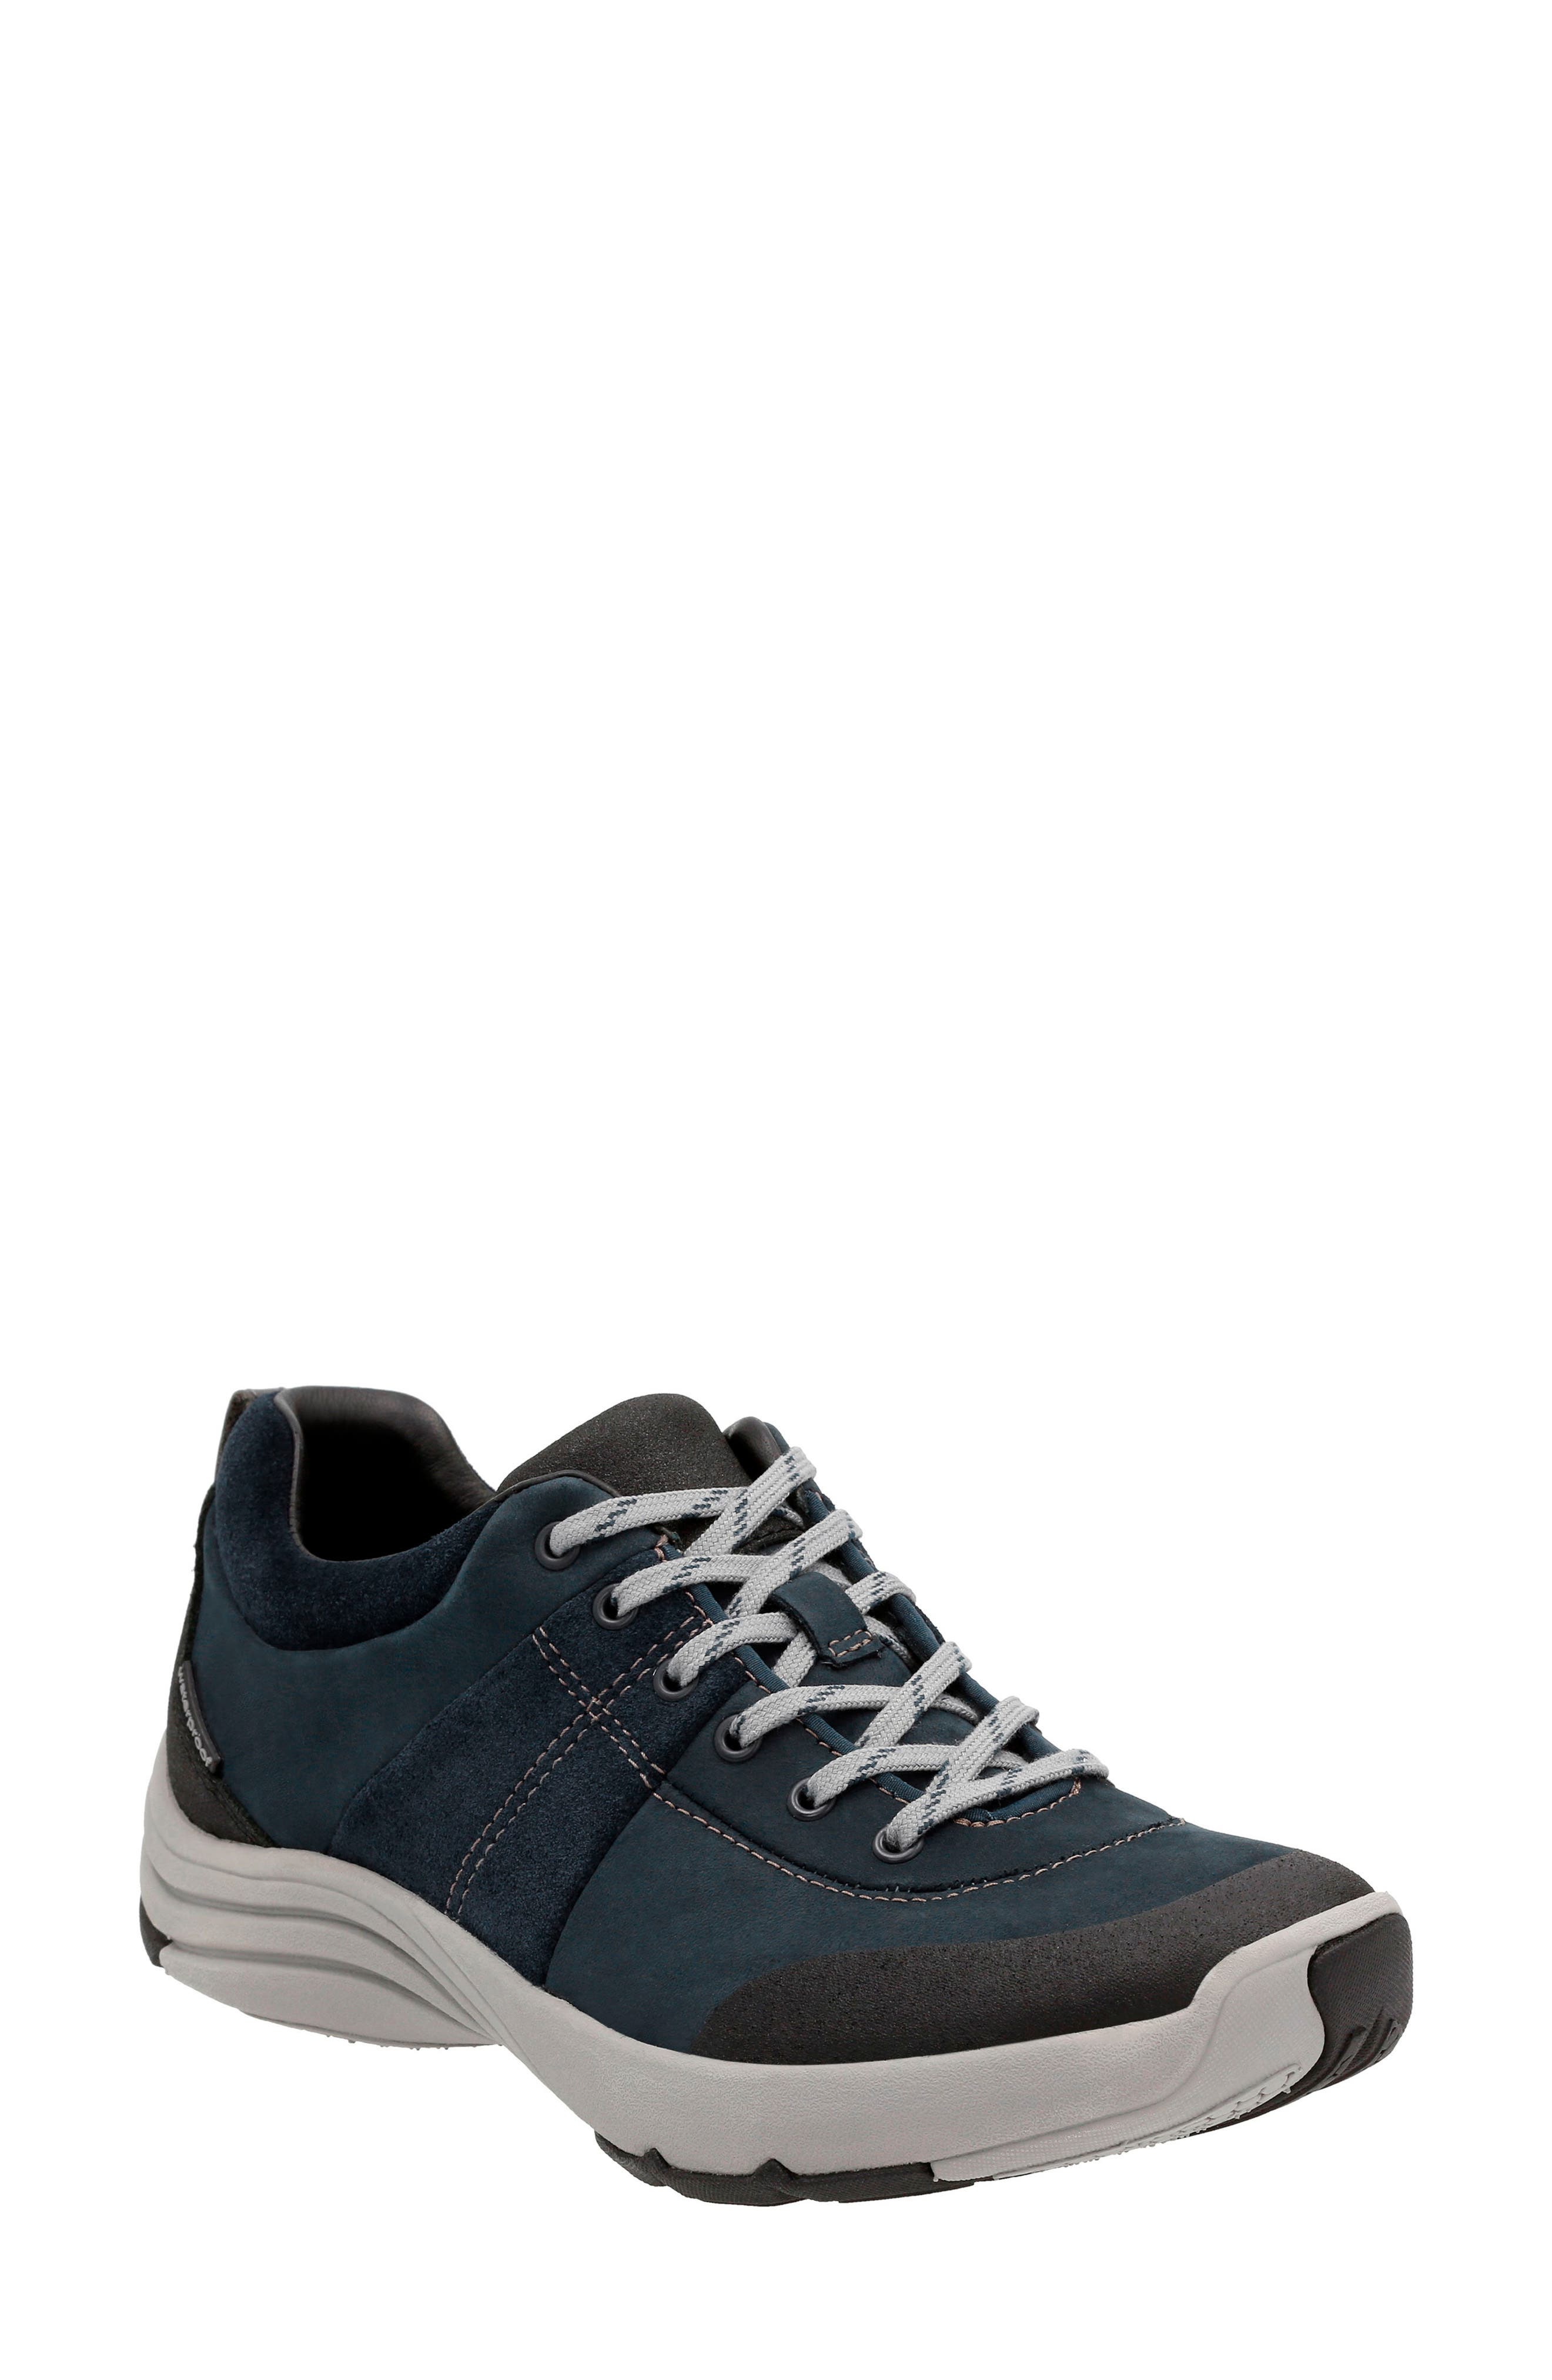 clarks wave andes sneaker